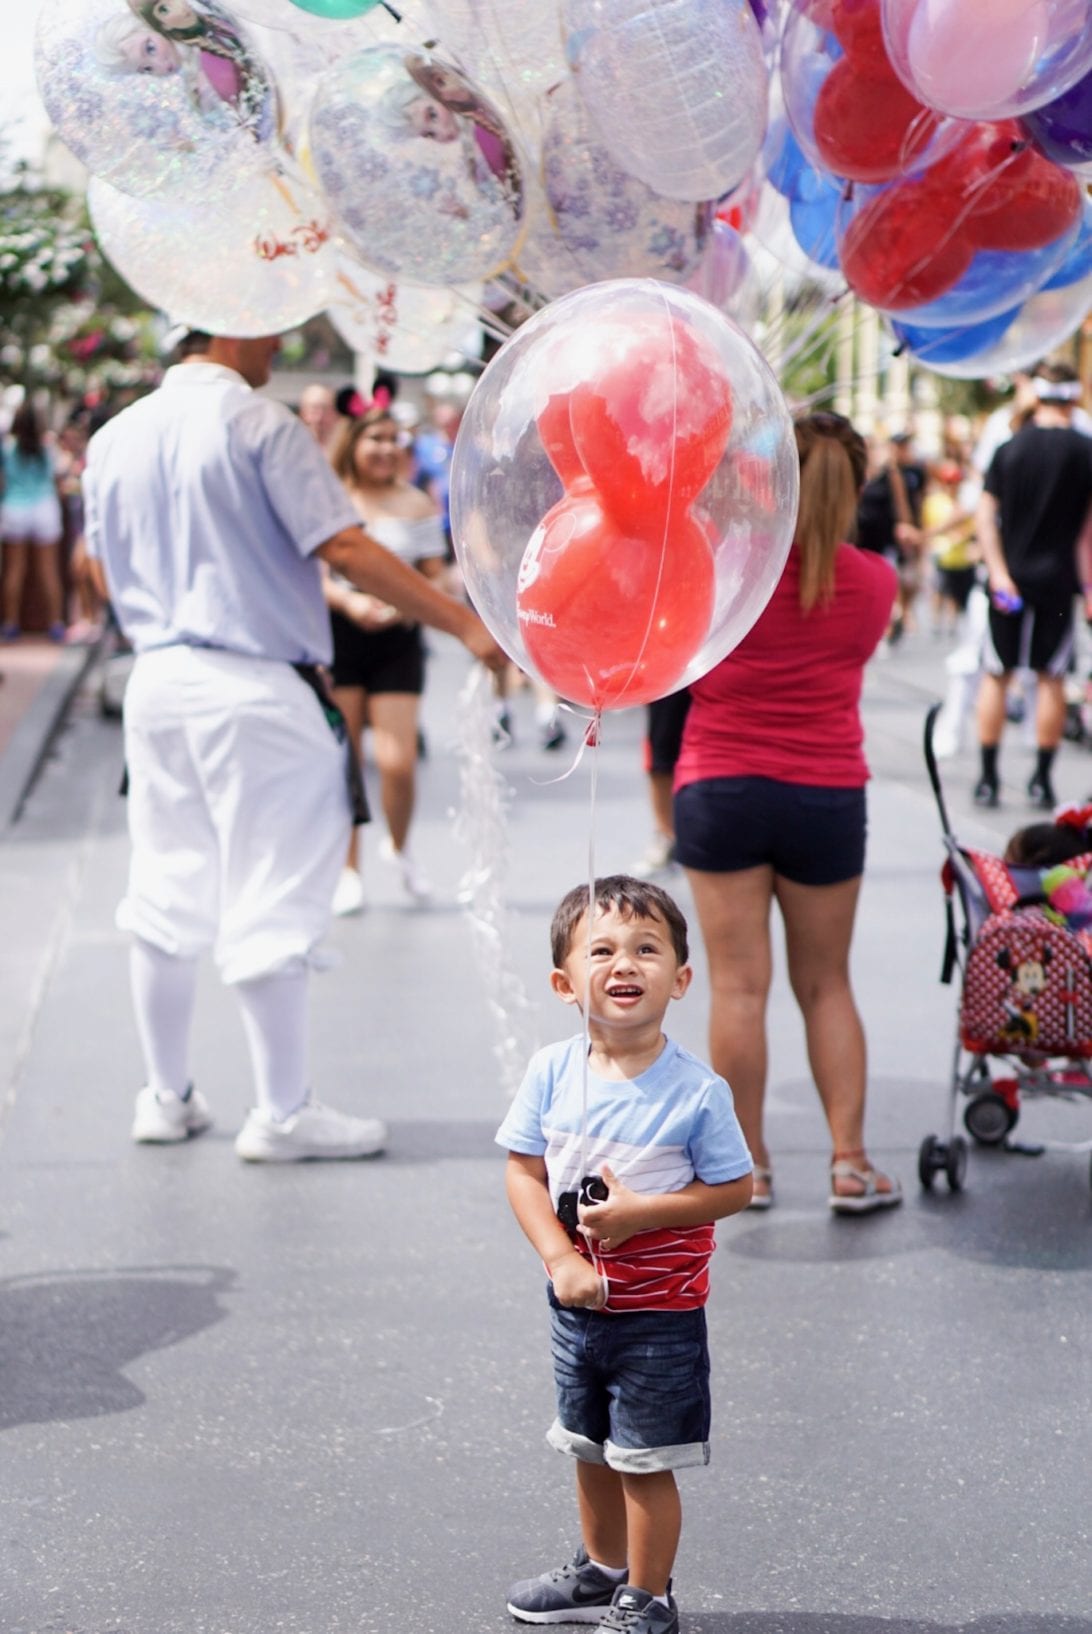 DISNEY WITH A TODDLER, TIPS FOR FAMILIES VISITING DISNEY, DISNEY WORLD, WHAT TO DO IN DISNEY WORLD, VISITING DISNEY WORLD, FIRST TIME IN DISNEY WORLD, VISITING DISNEY WORLD WITH A TODDLER